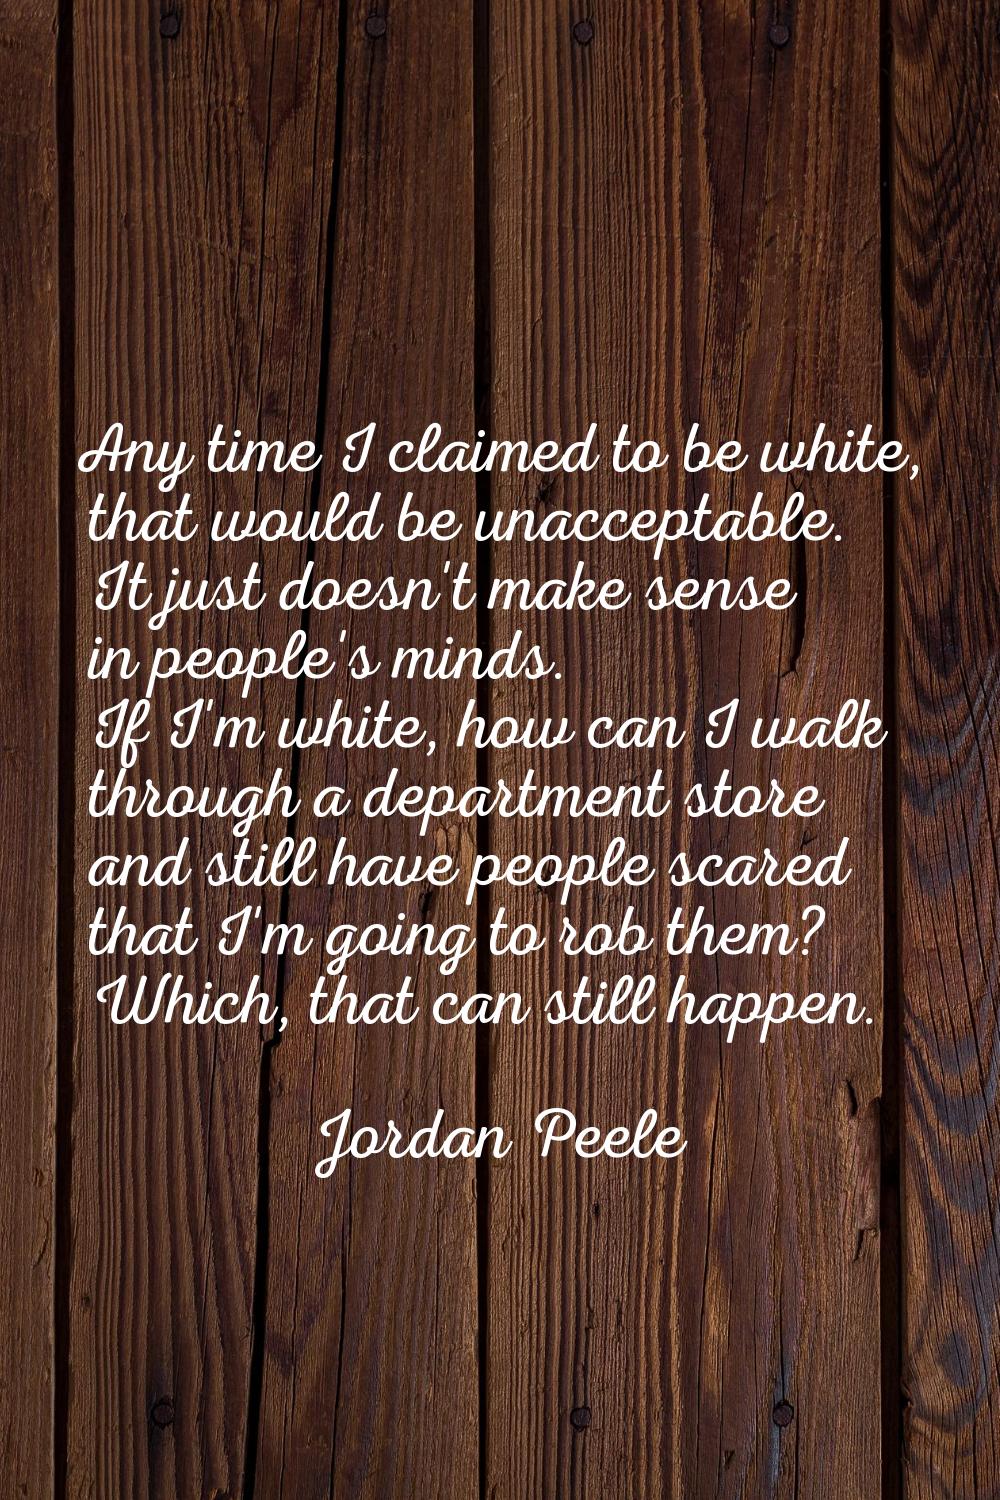 Any time I claimed to be white, that would be unacceptable. It just doesn't make sense in people's 